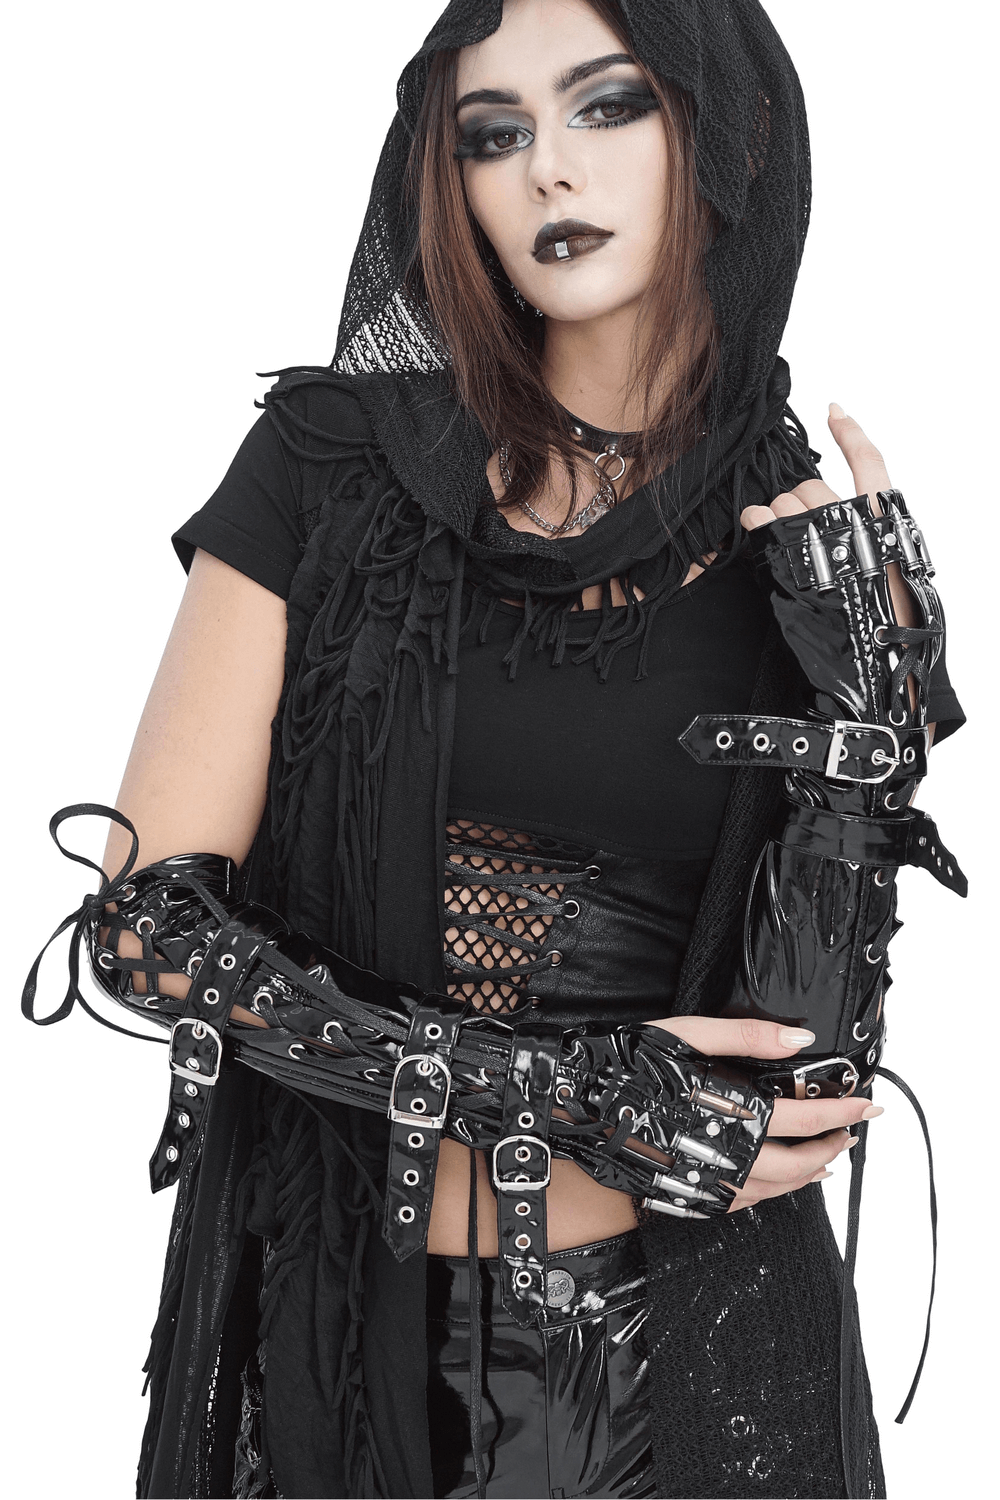 Edgy Black Lace Up Fingerless Gloves with Buckles